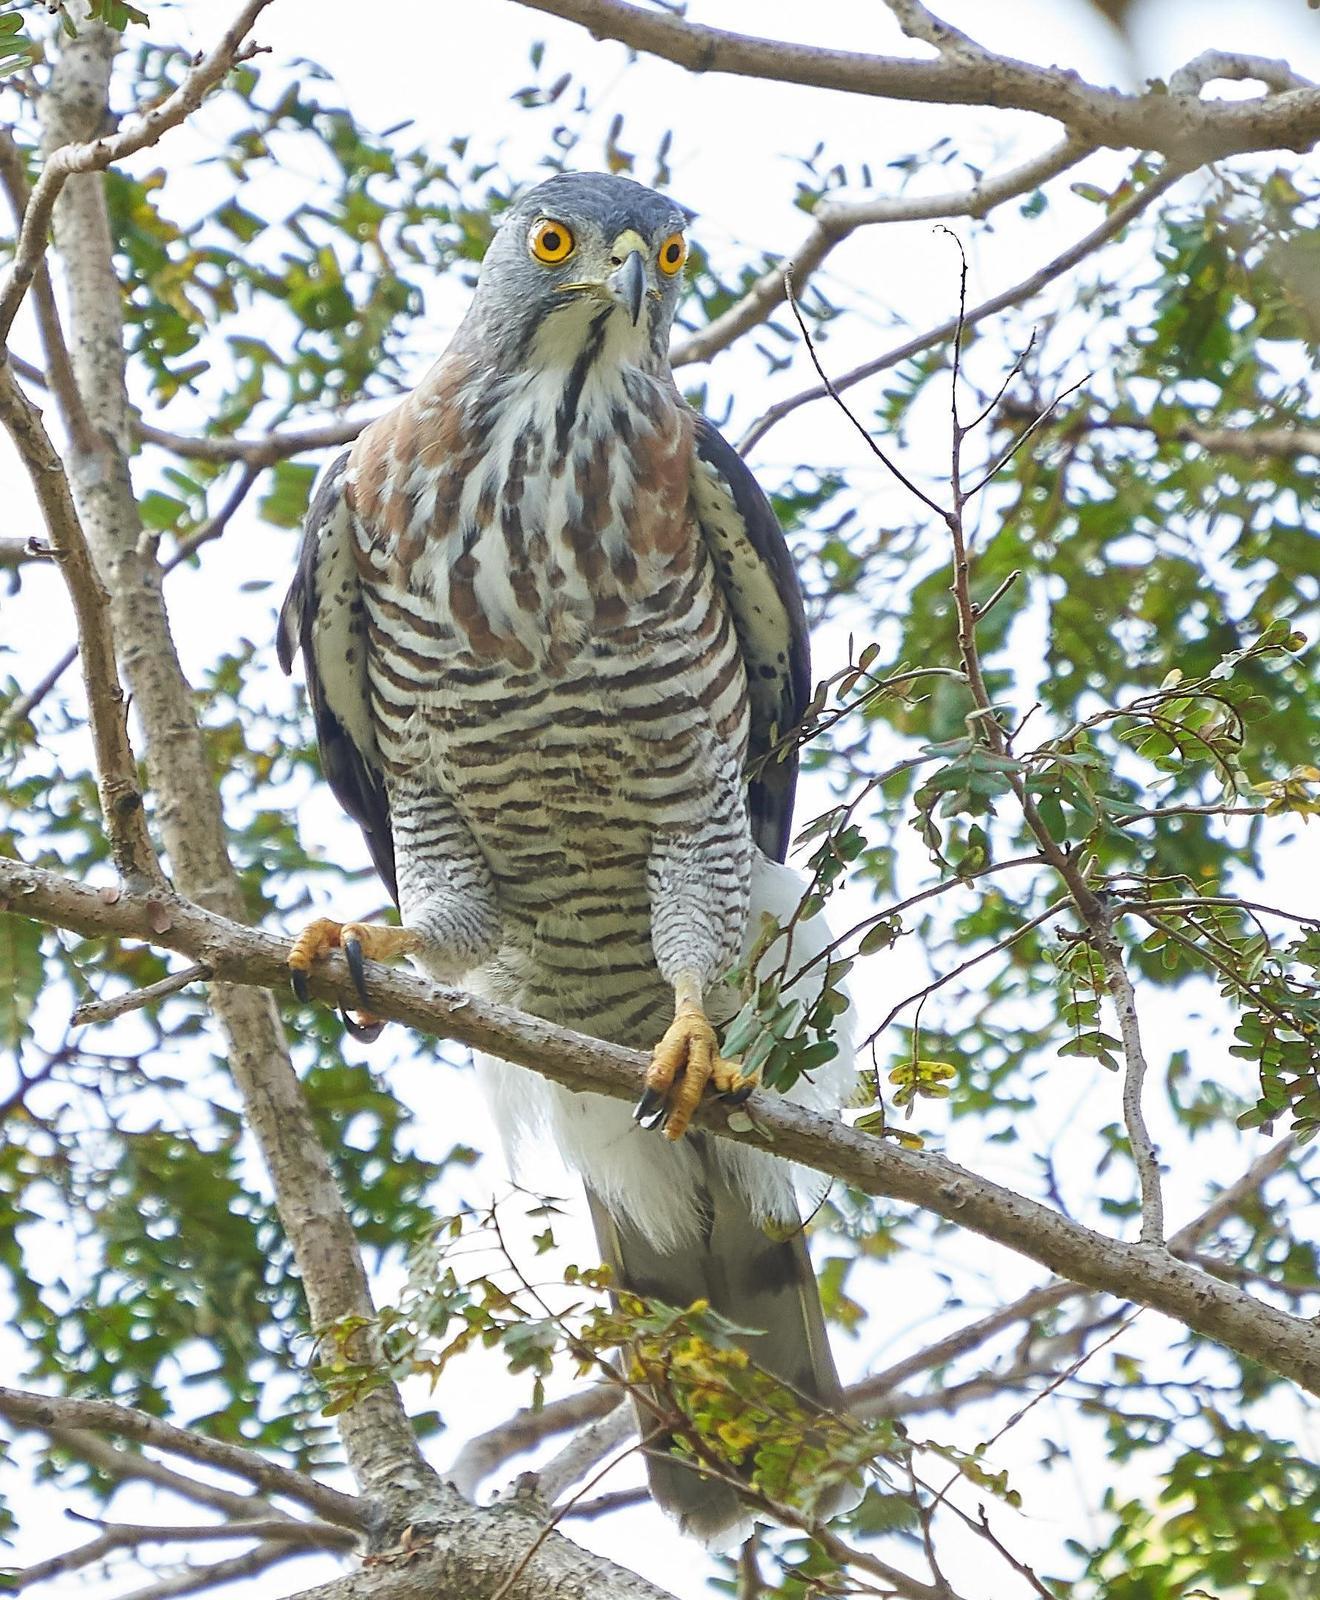 Crested Goshawk Photo by Steven Cheong